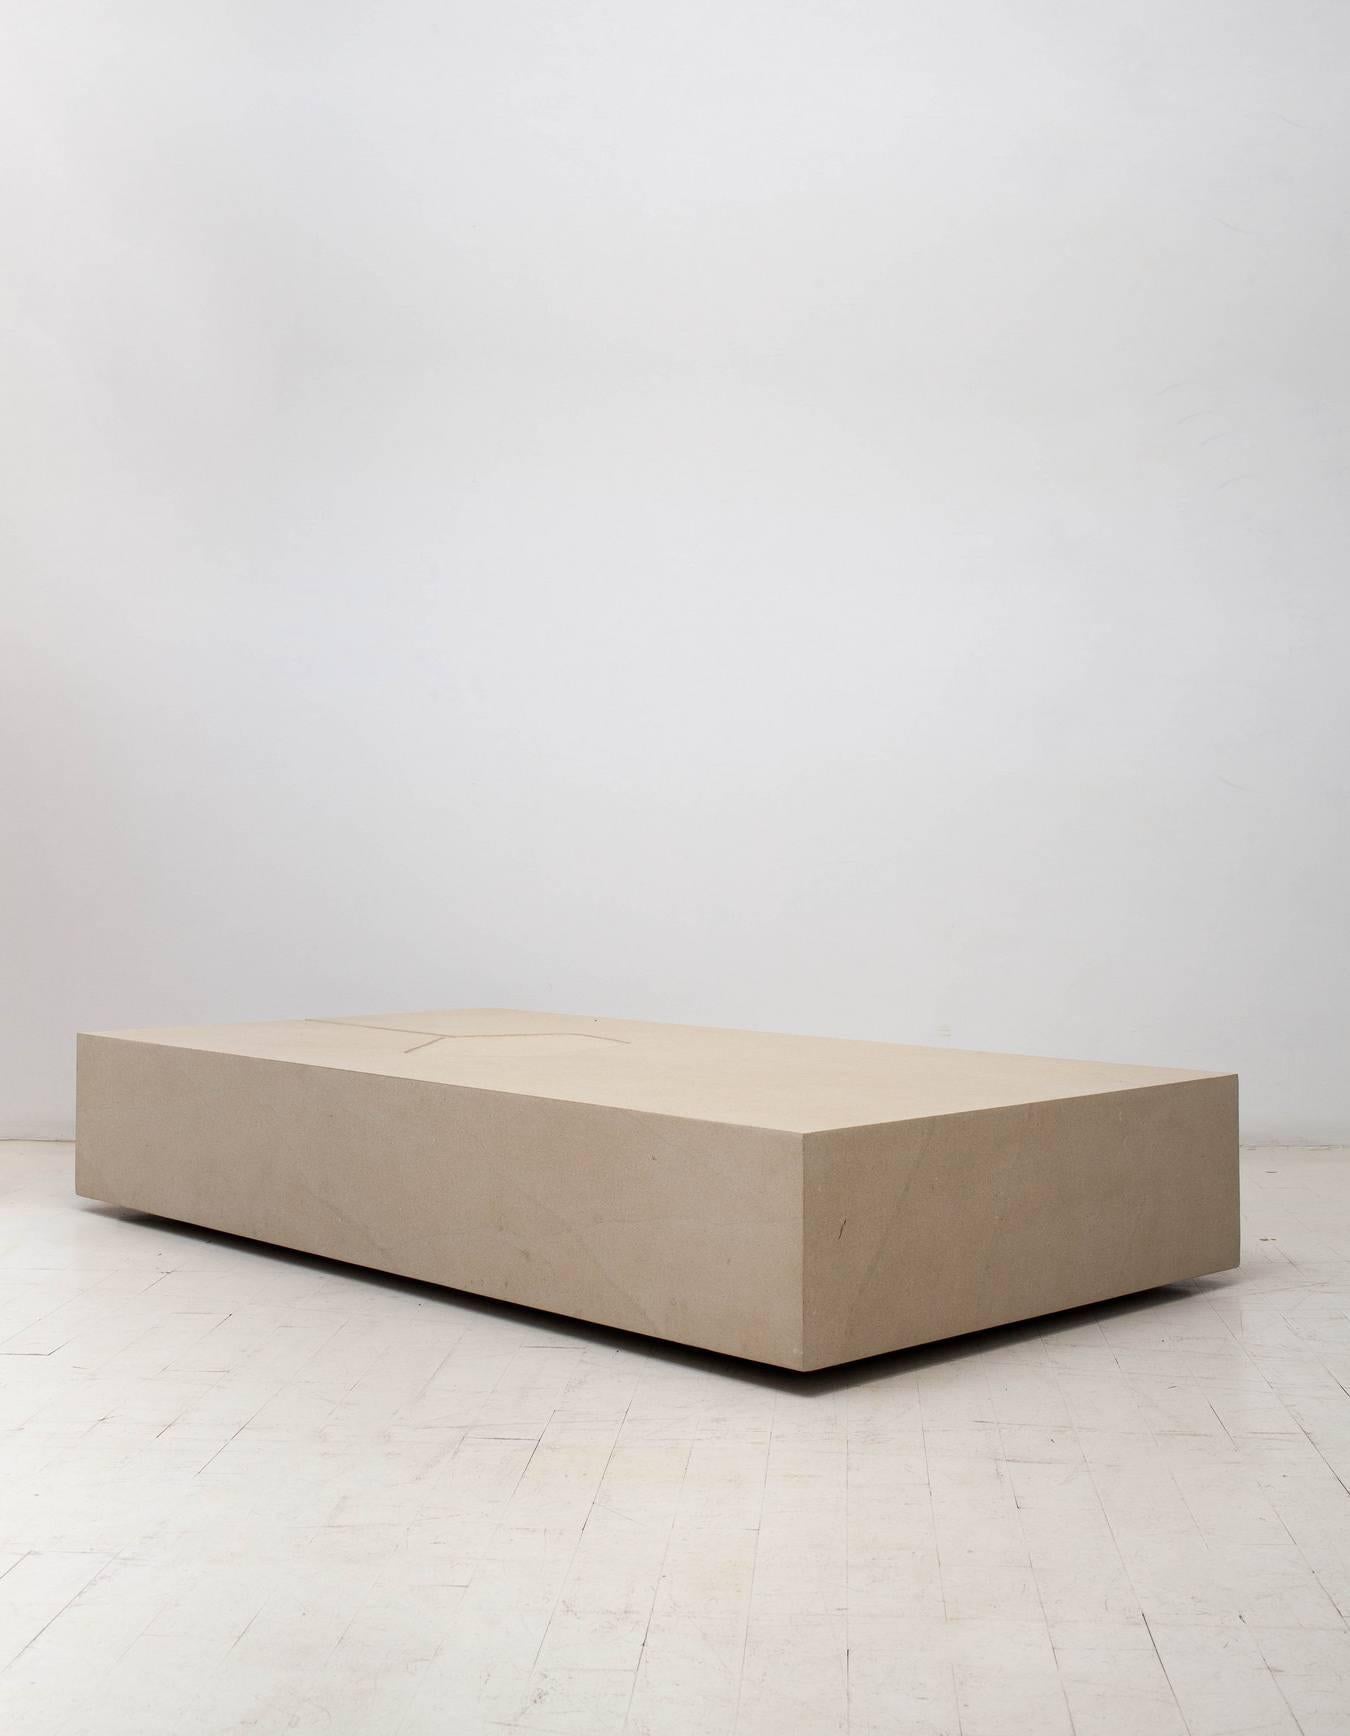 Clareira coffee table by Brazilian designer Claudia Moreira Salles

The Clareira coffee table is a rectangular box made of 5 stone slabs. The top surface is carved with an engraving reminiscent of a path and clearing, giving way to its name,